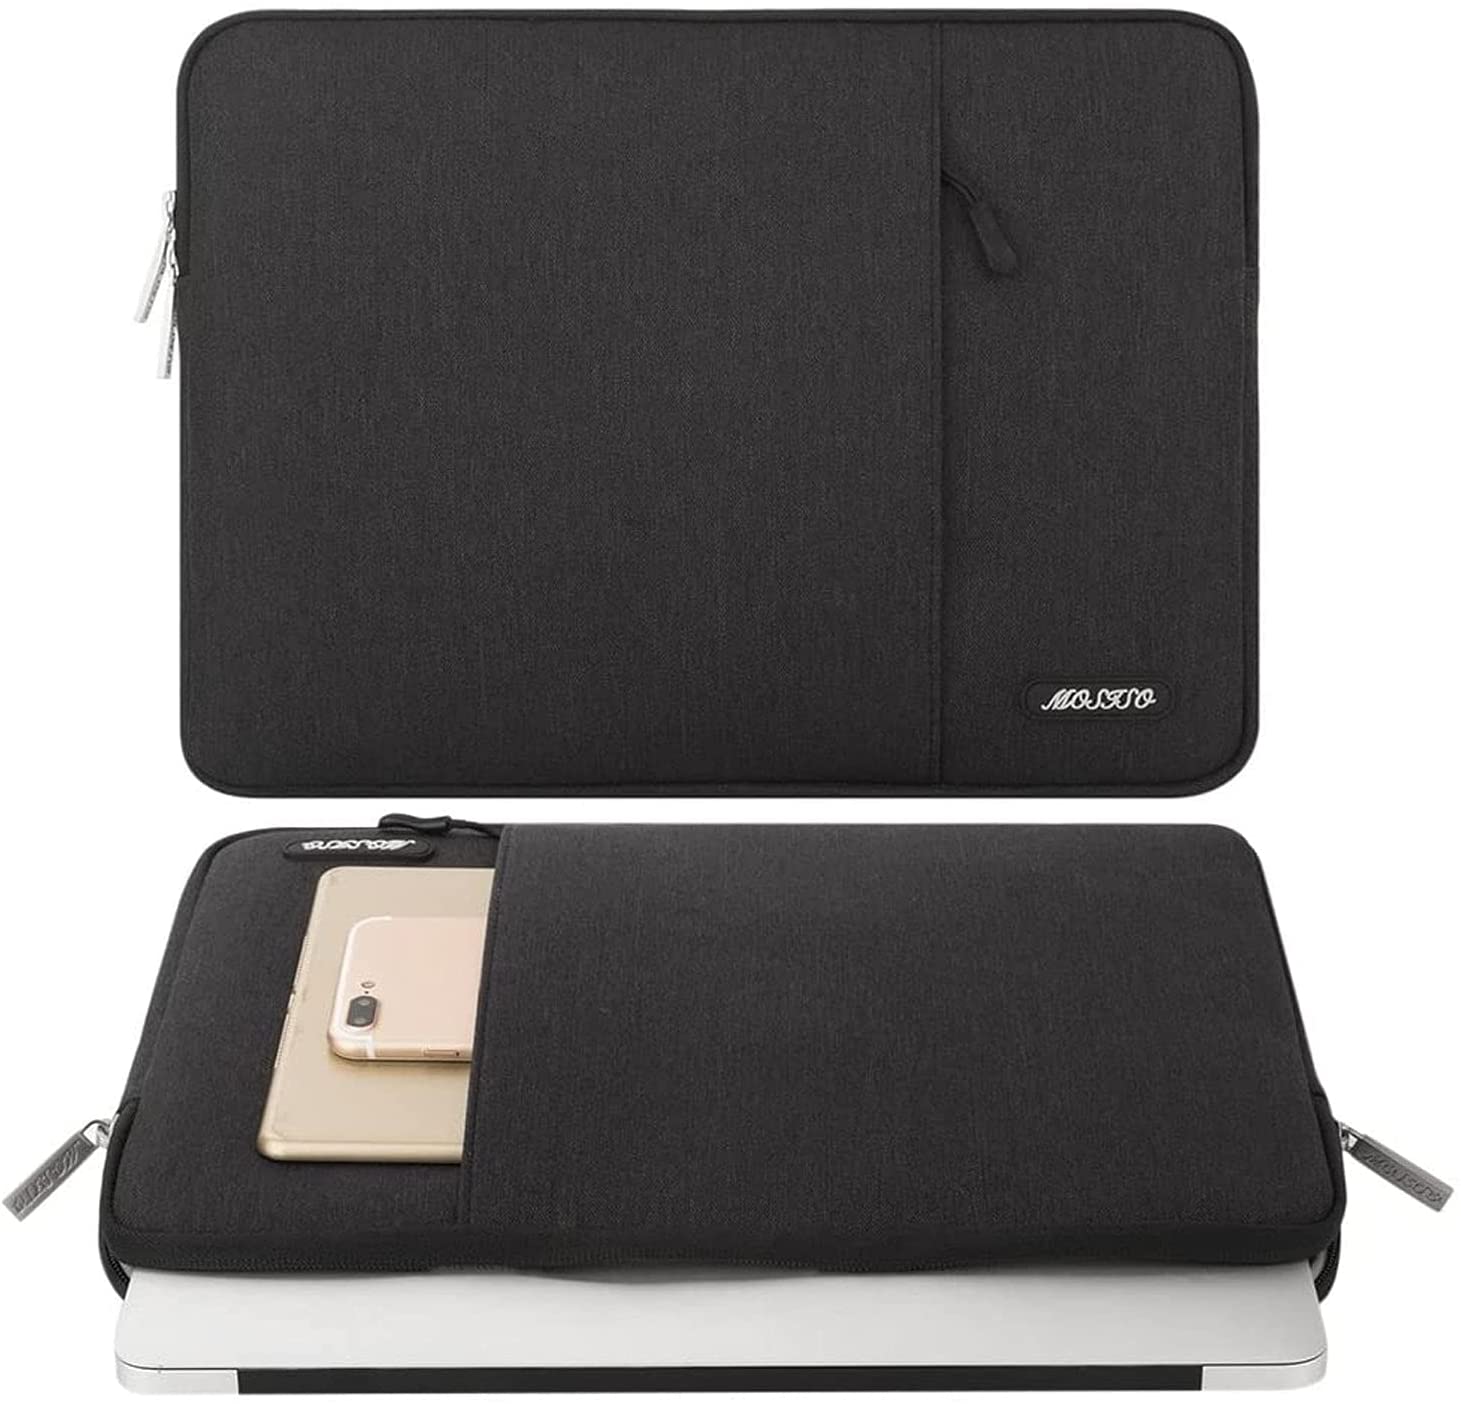 Sleeve Bag Laptop Case For Macbook Air Pro M1 13 15 11 12 16 A2179